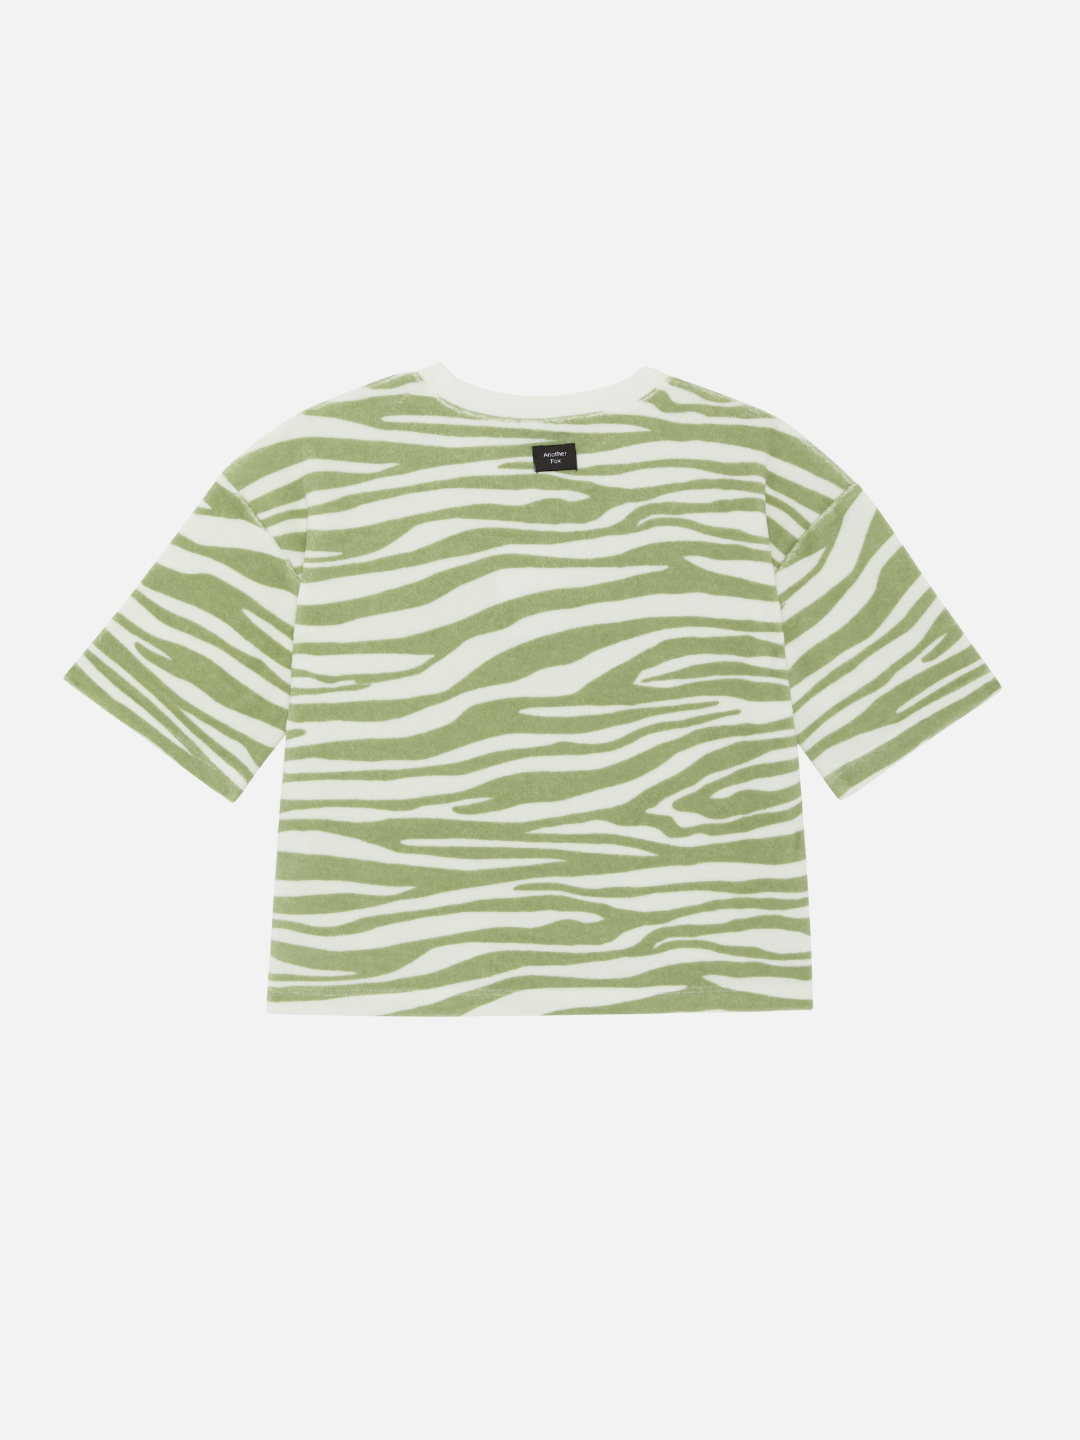 A back view of the kid's tee in green tiger print